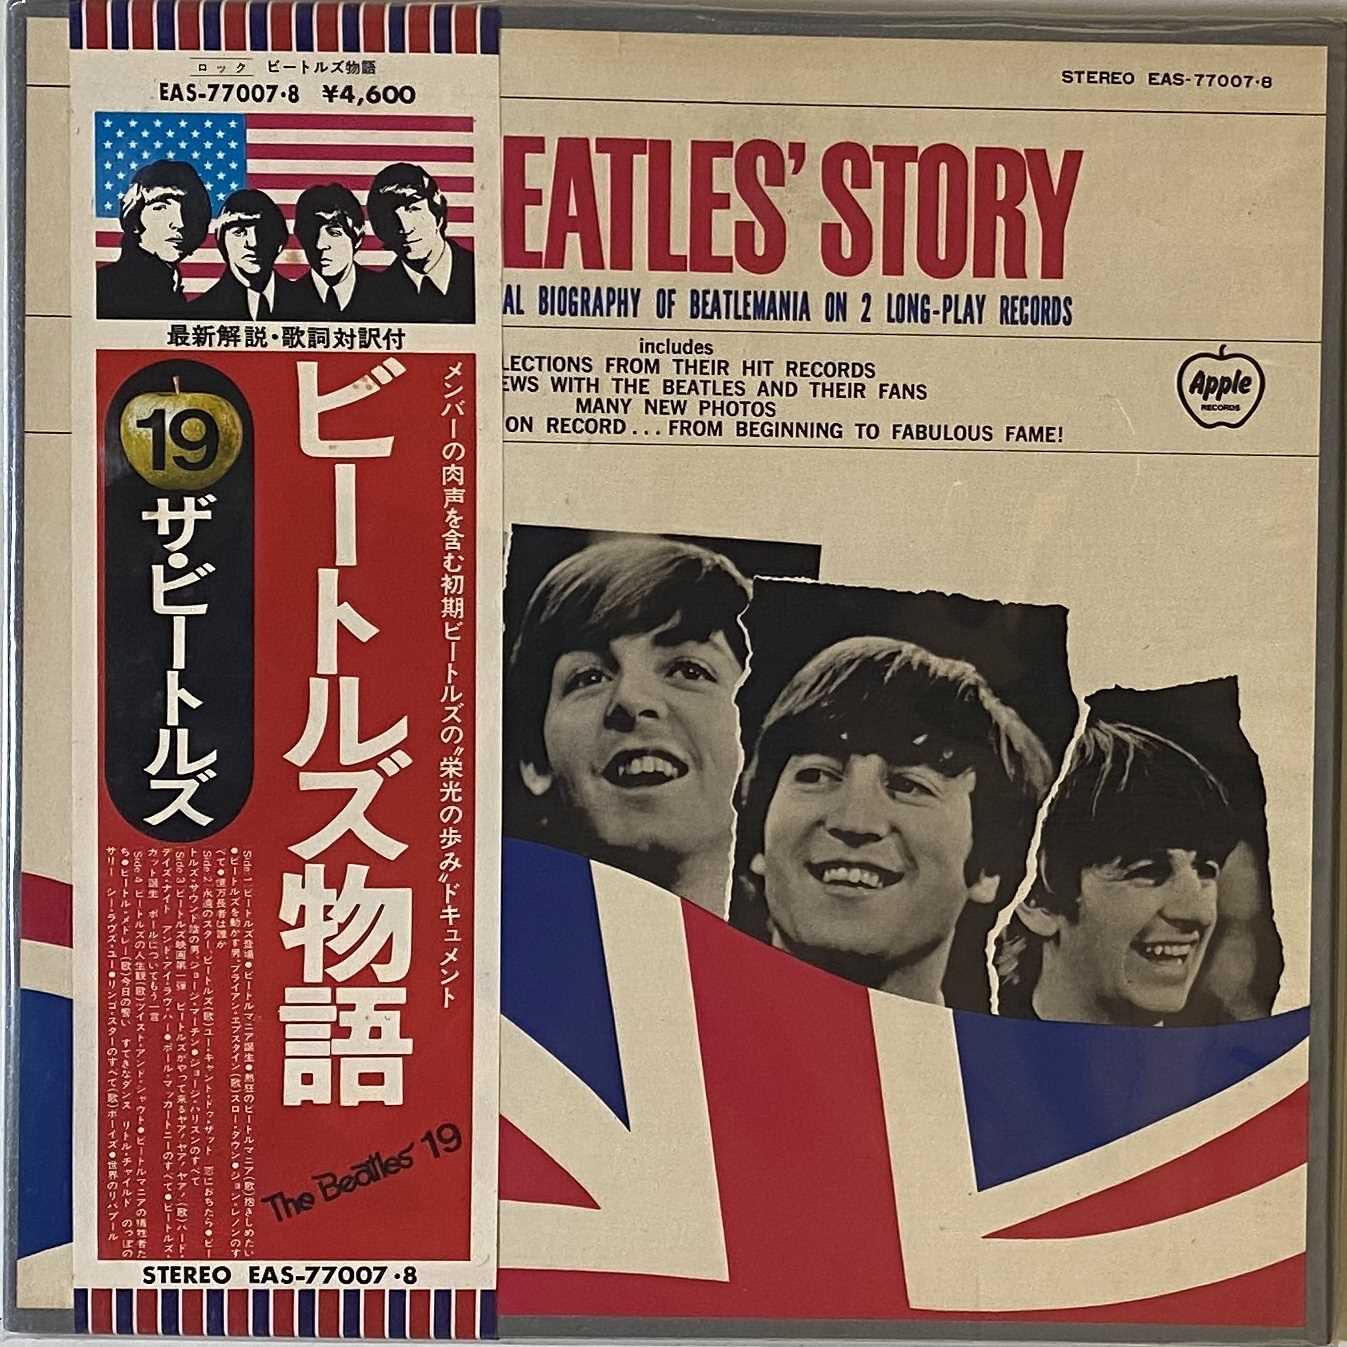 THE BEATLES - JAPANESE PRESSING LPs (1970s/1980s) - Image 3 of 3